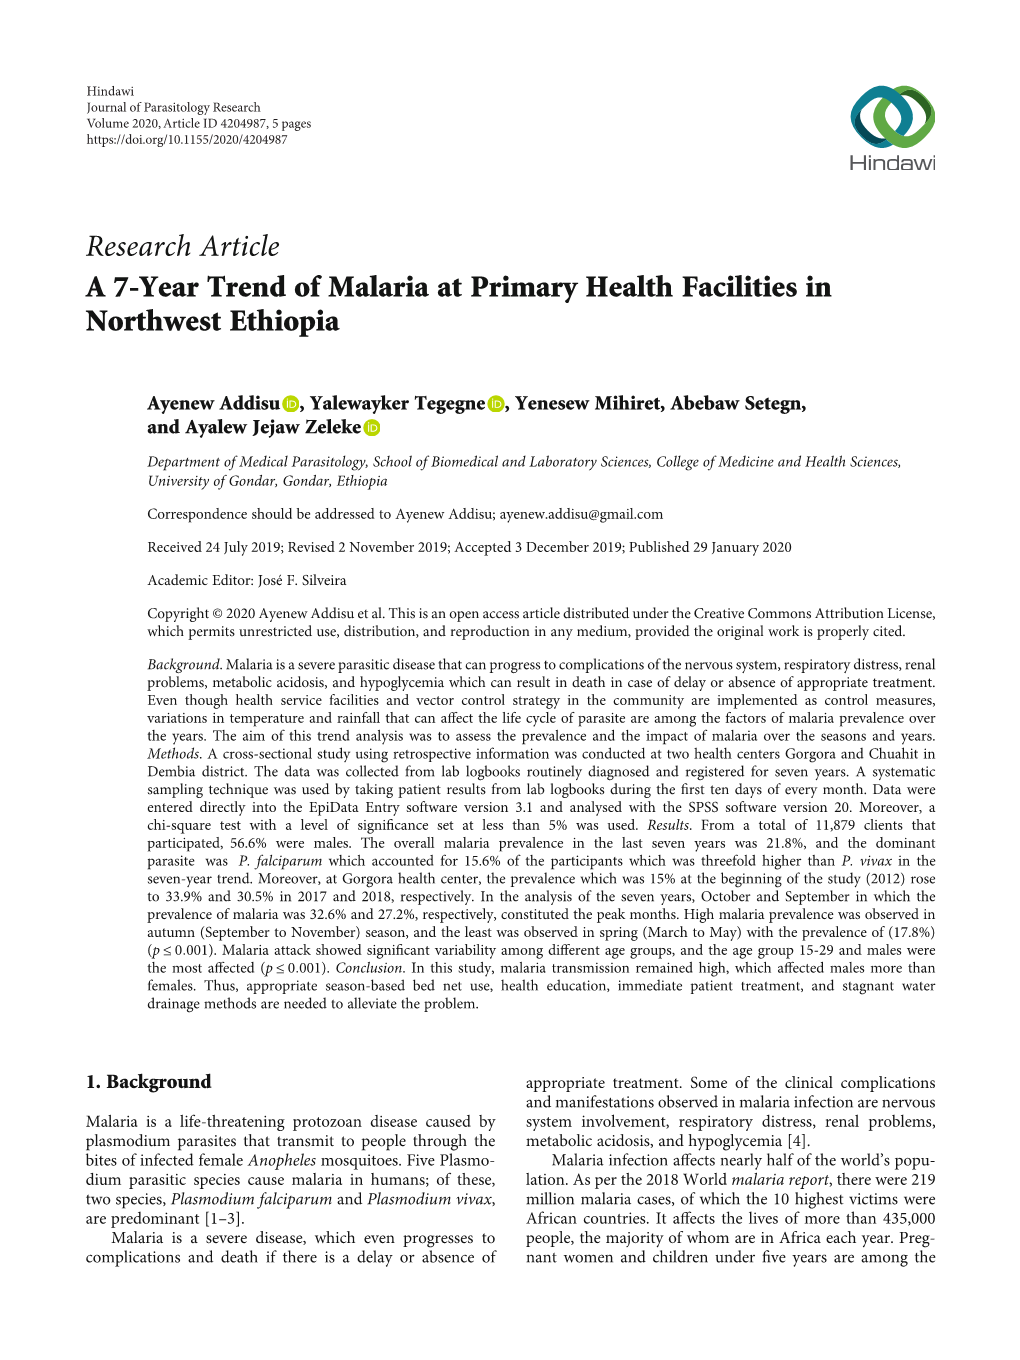 A 7-Year Trend of Malaria at Primary Health Facilities in Northwest Ethiopia